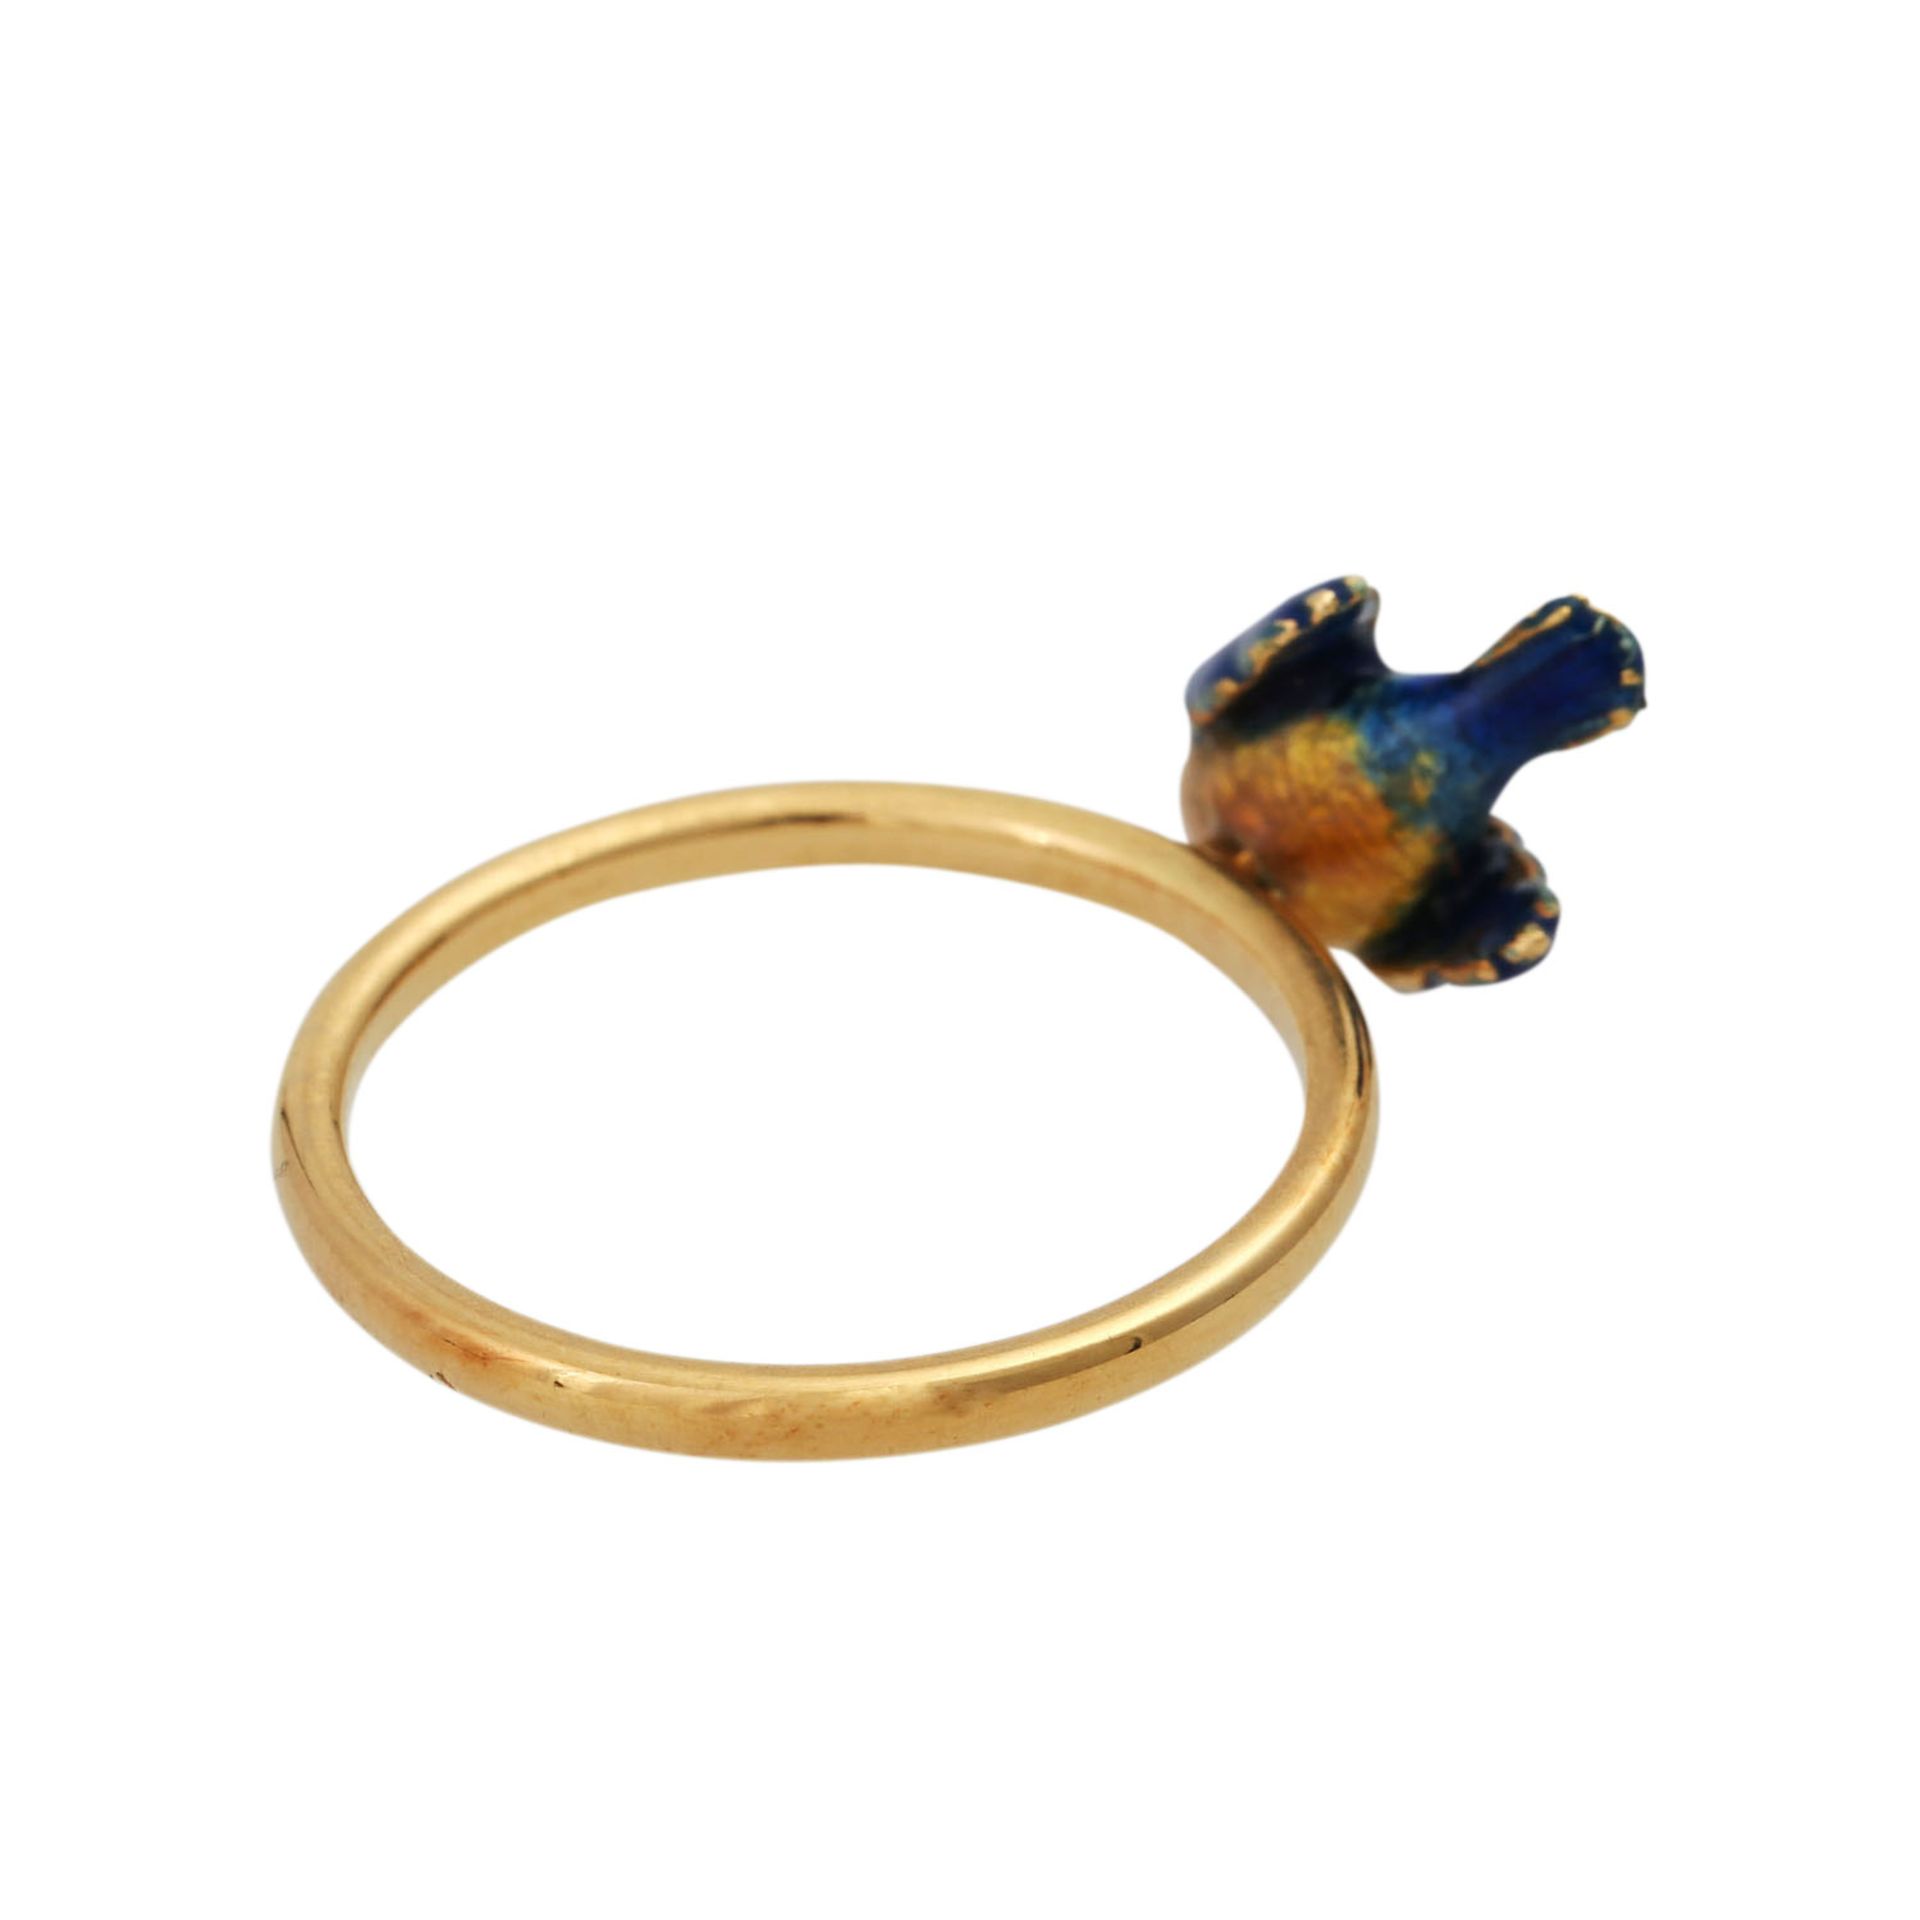 NIESSING Ring "Vogel"in GG 18K, bunt emailliert. RW: ca. 54, Vogel ca. 14x8x8 mm. Ende 20. Jh. - Image 3 of 4